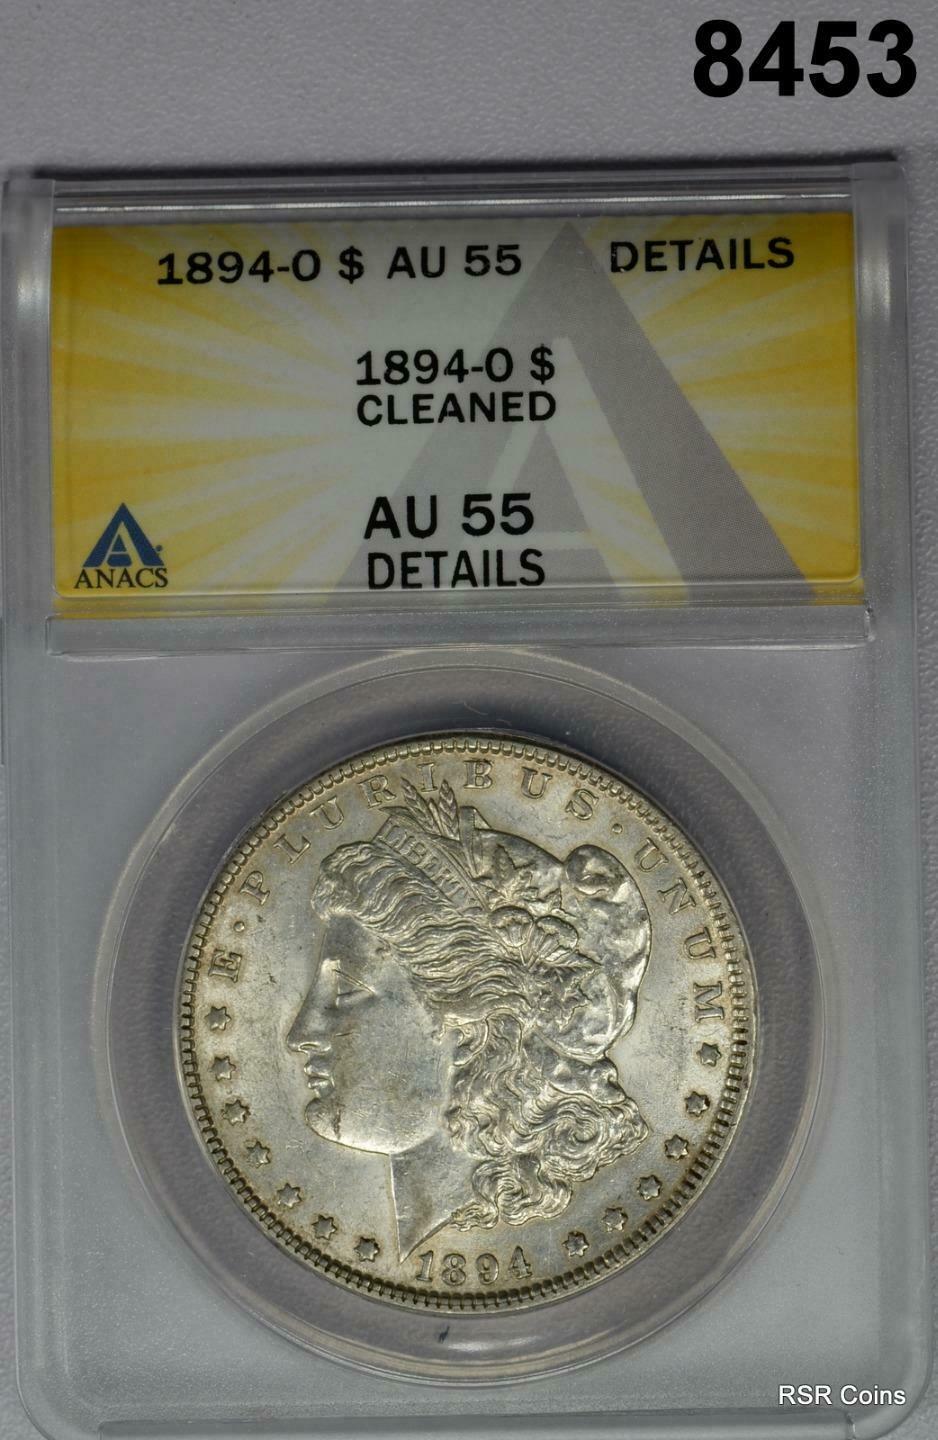 1894 O MORGAN SILVER DOLLAR ANACS CERTIFIED AU55 CLEANED #8453